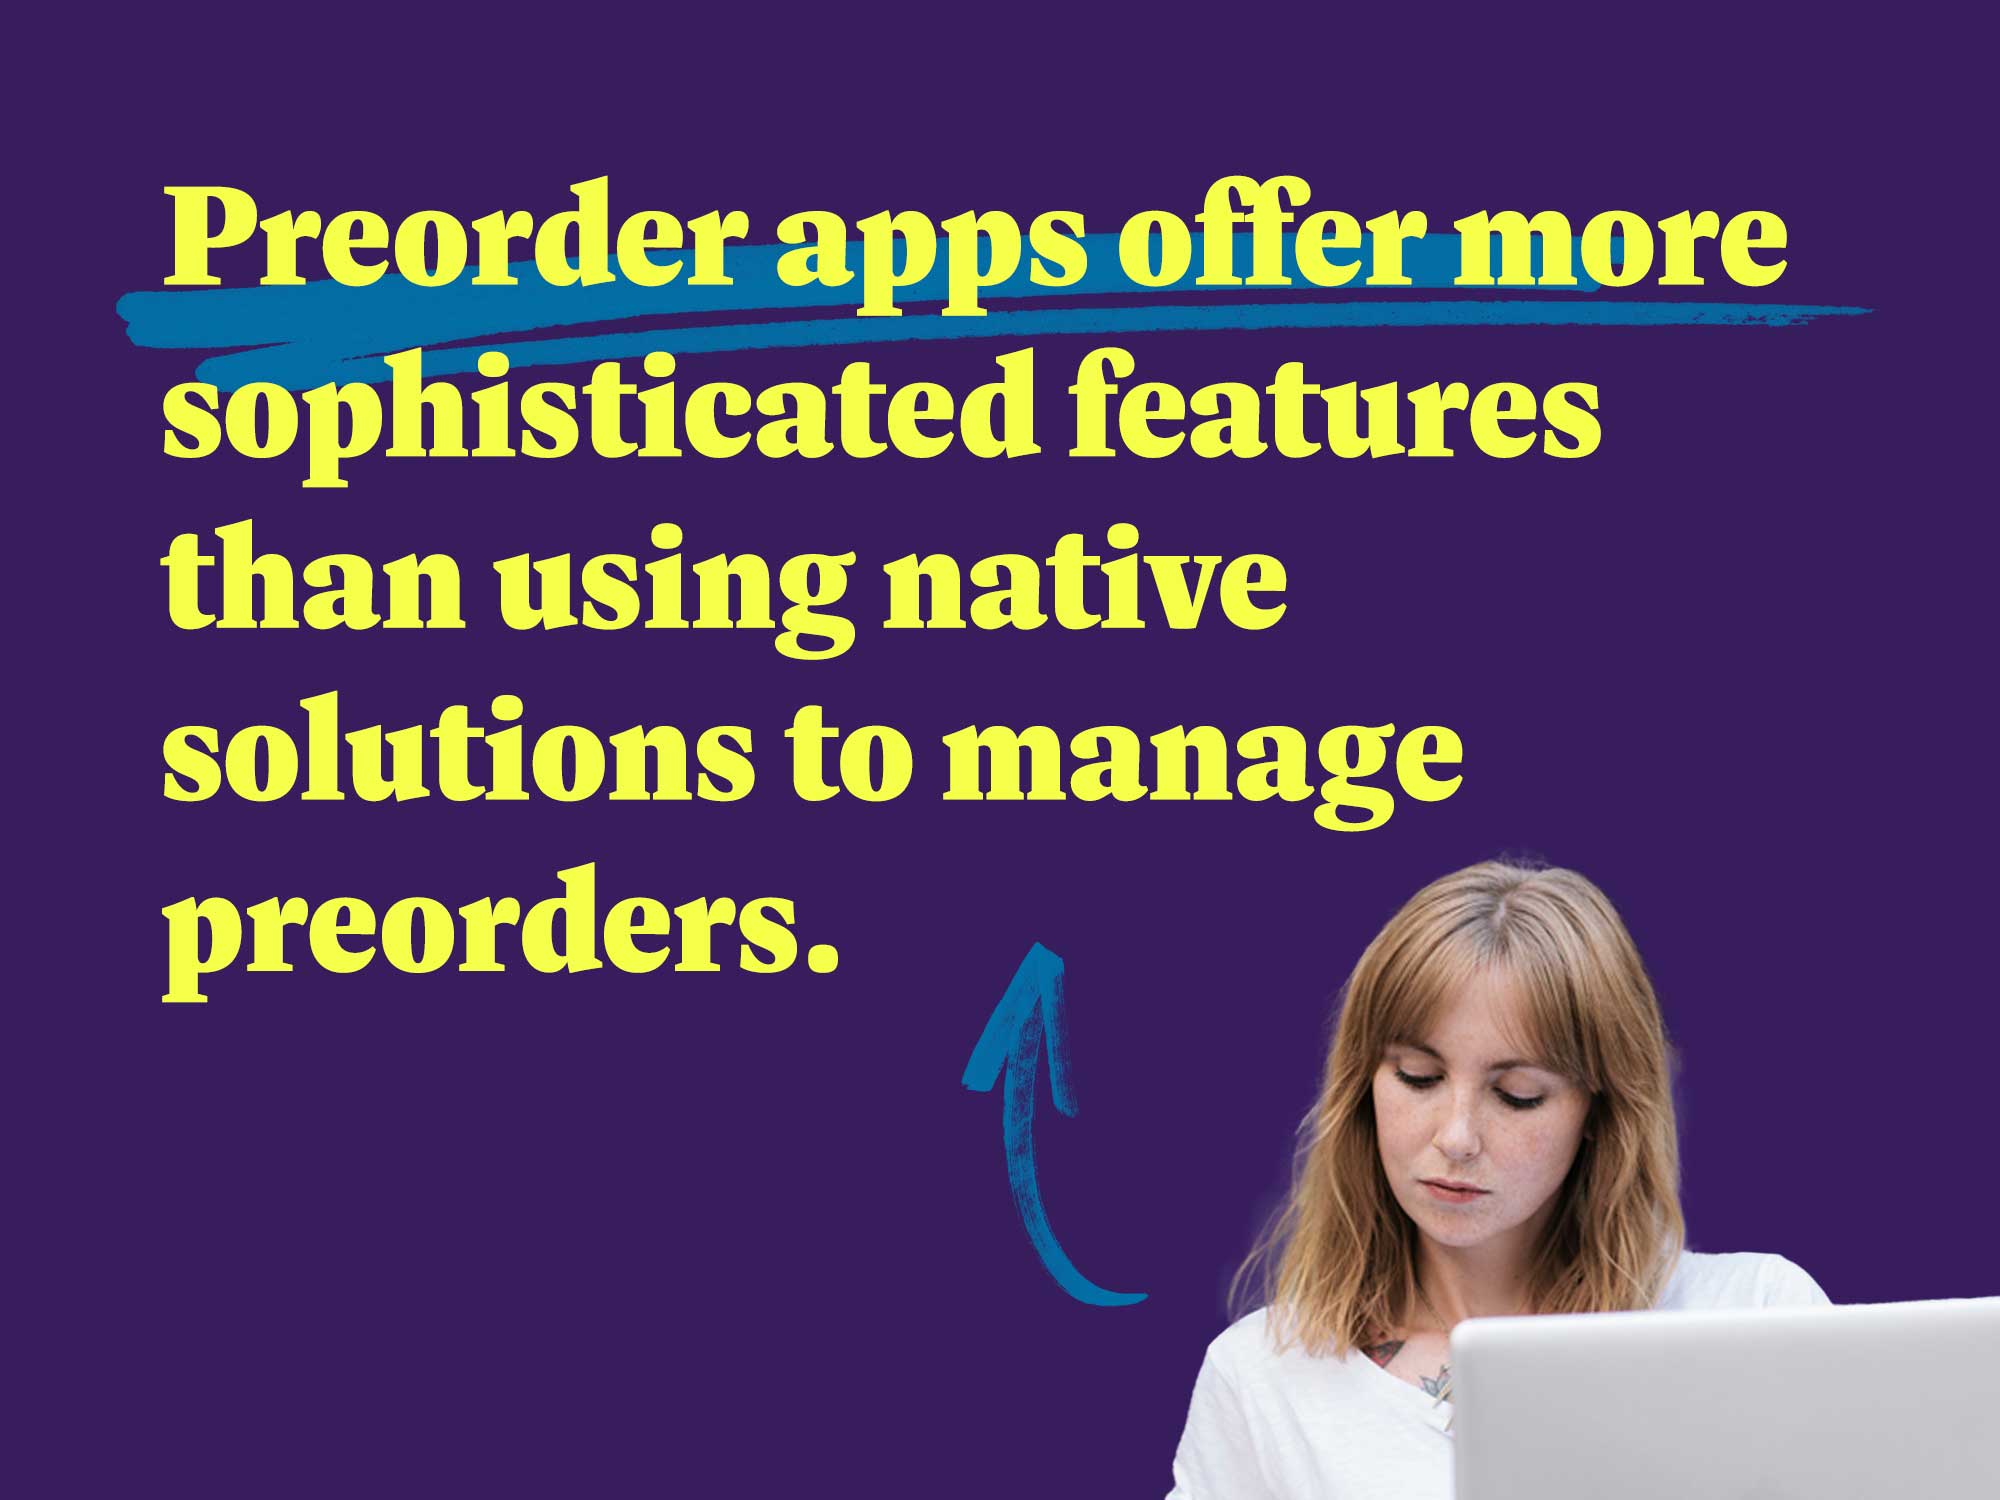 Preorder apps offer more sophisticated features than using native solutions to manage preorders.